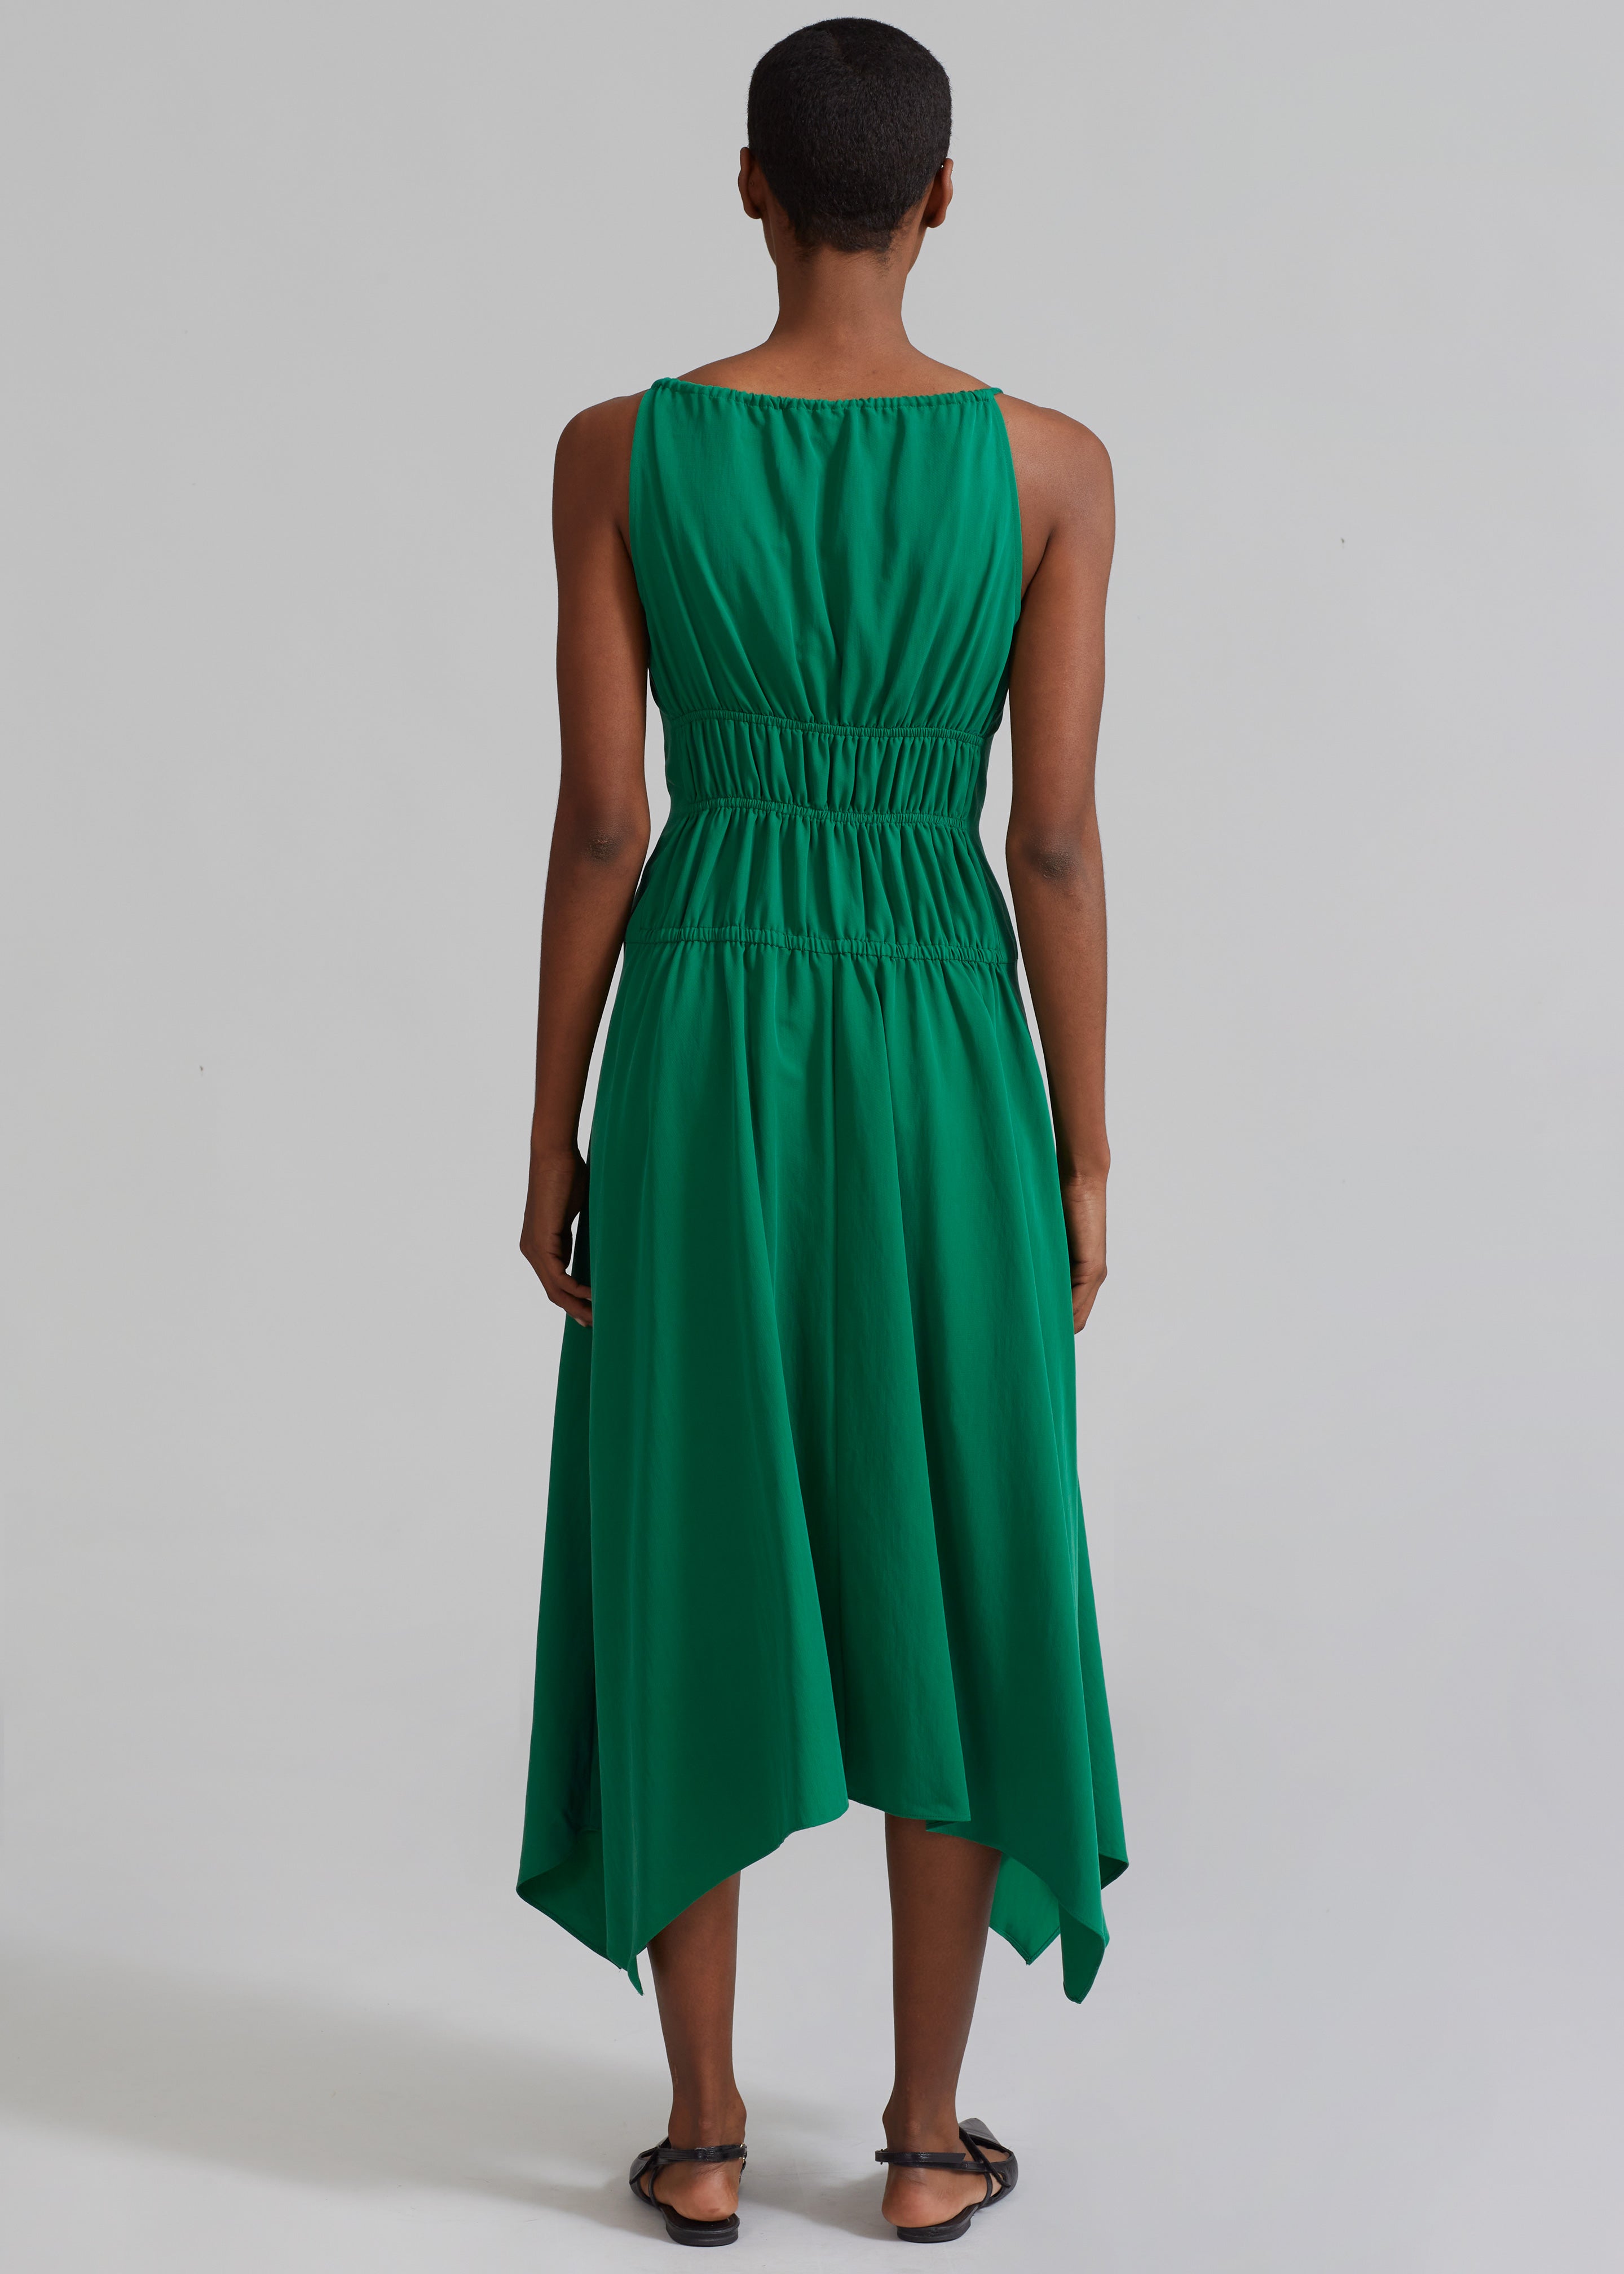 Proenza Schouler White Label Drapey Suiting Ruched Dress - Green - 10